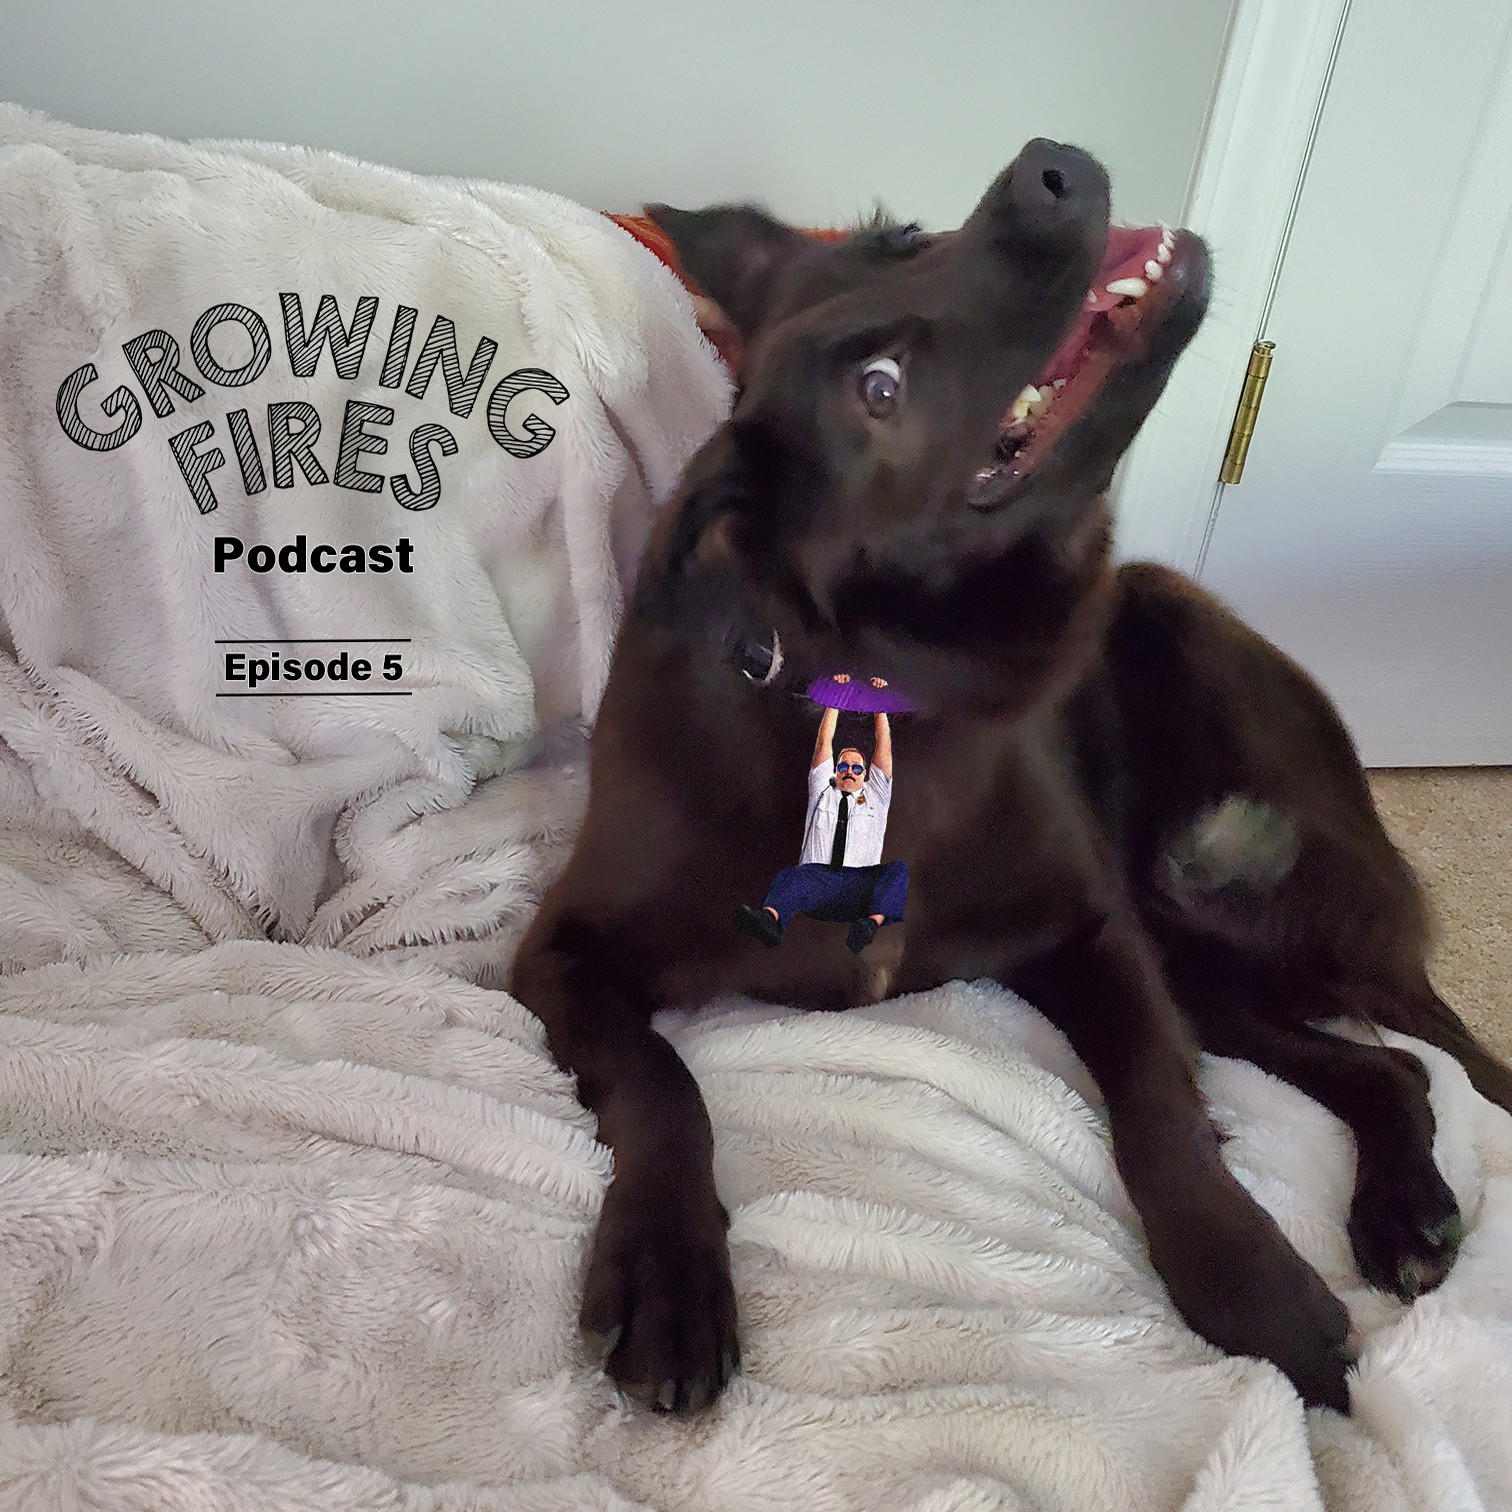 the Growing Fires Podcast